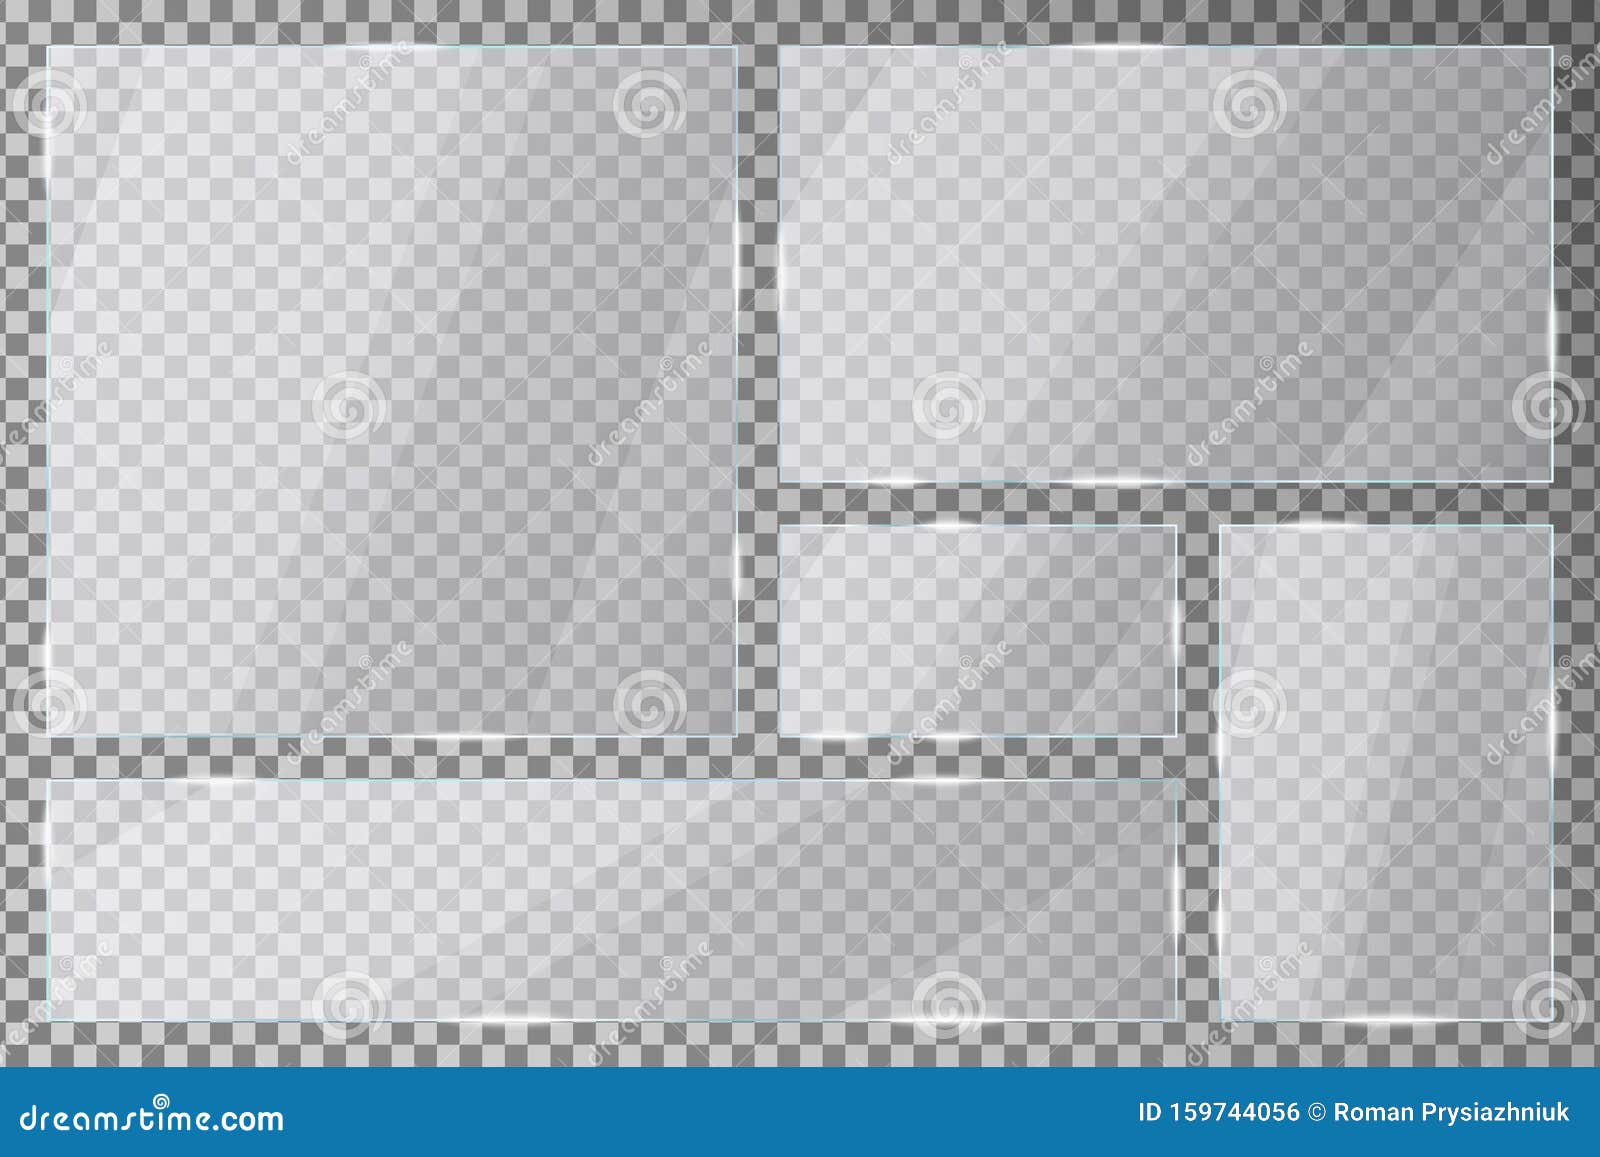 glass plates set on transparent background. acrylic or plexiglass plates with gleams and light reflections in rectangle and square